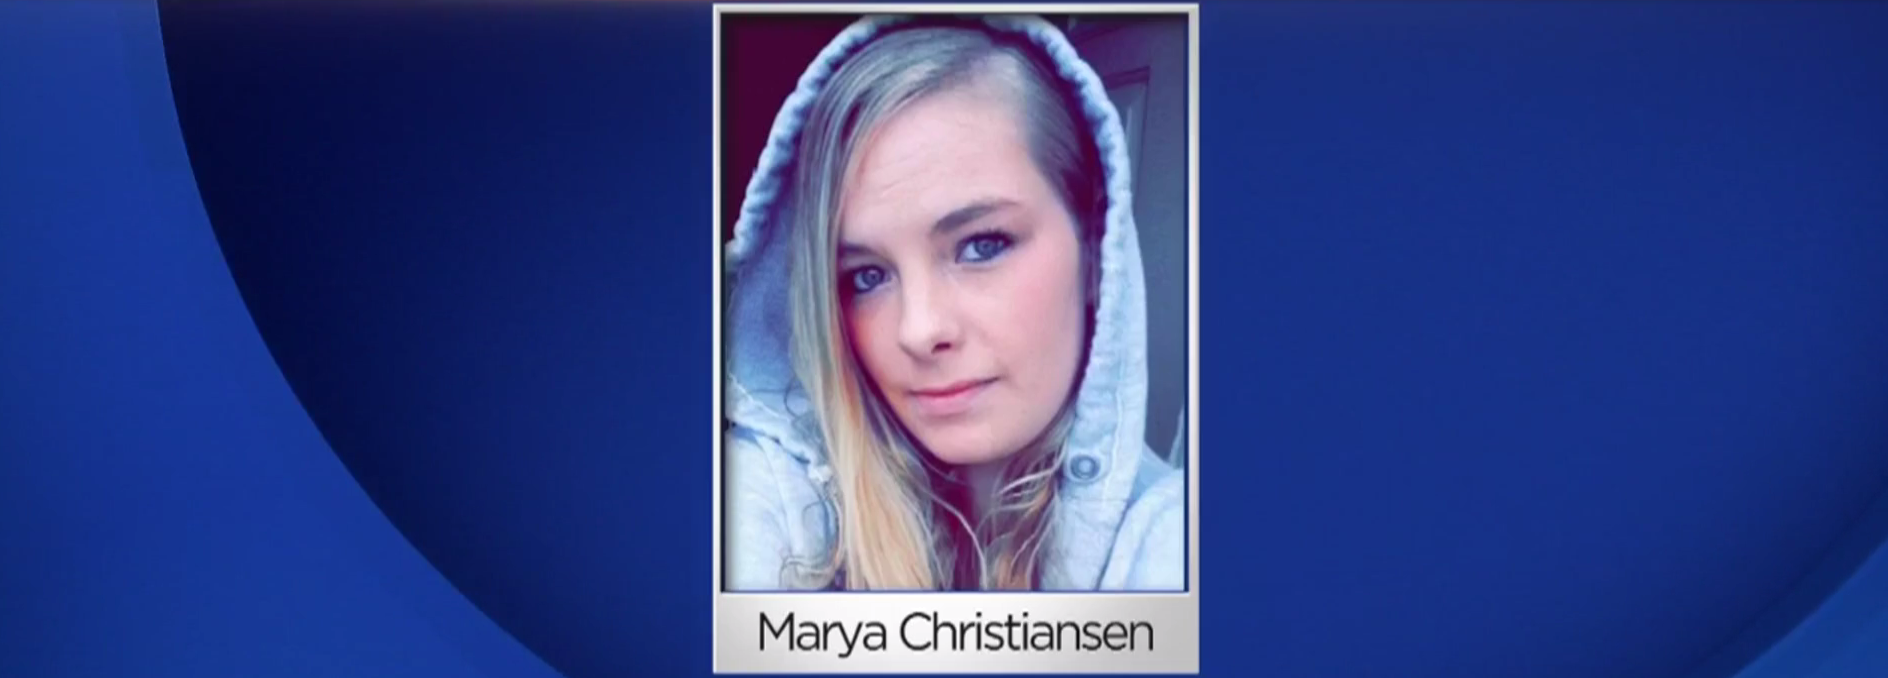 Police Body Found In River Is Missing Minnesota Woman Marya 3549